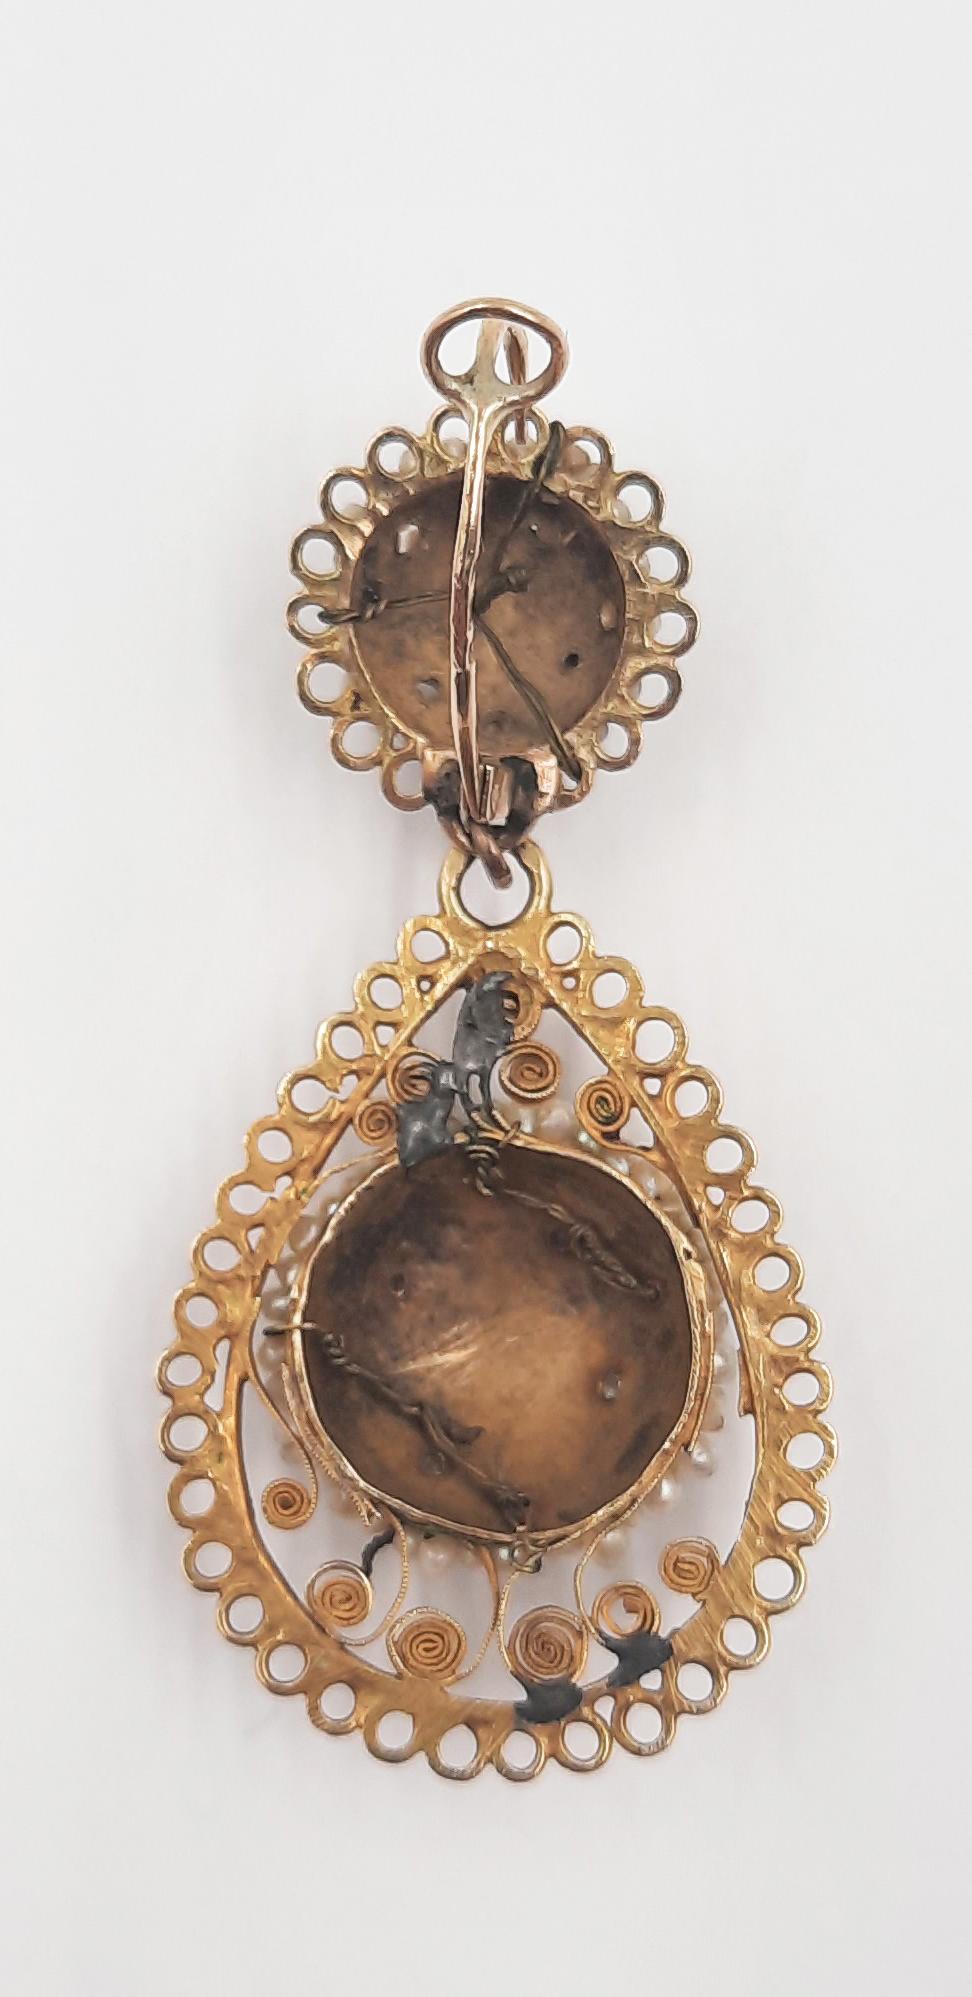 Antique (circa 1800) and pretty Italian 12 carats yellow gold filigree pendant earrings with seed pearls and enamel. No hallmarks or stamps, but tested as gold. Old repairs.